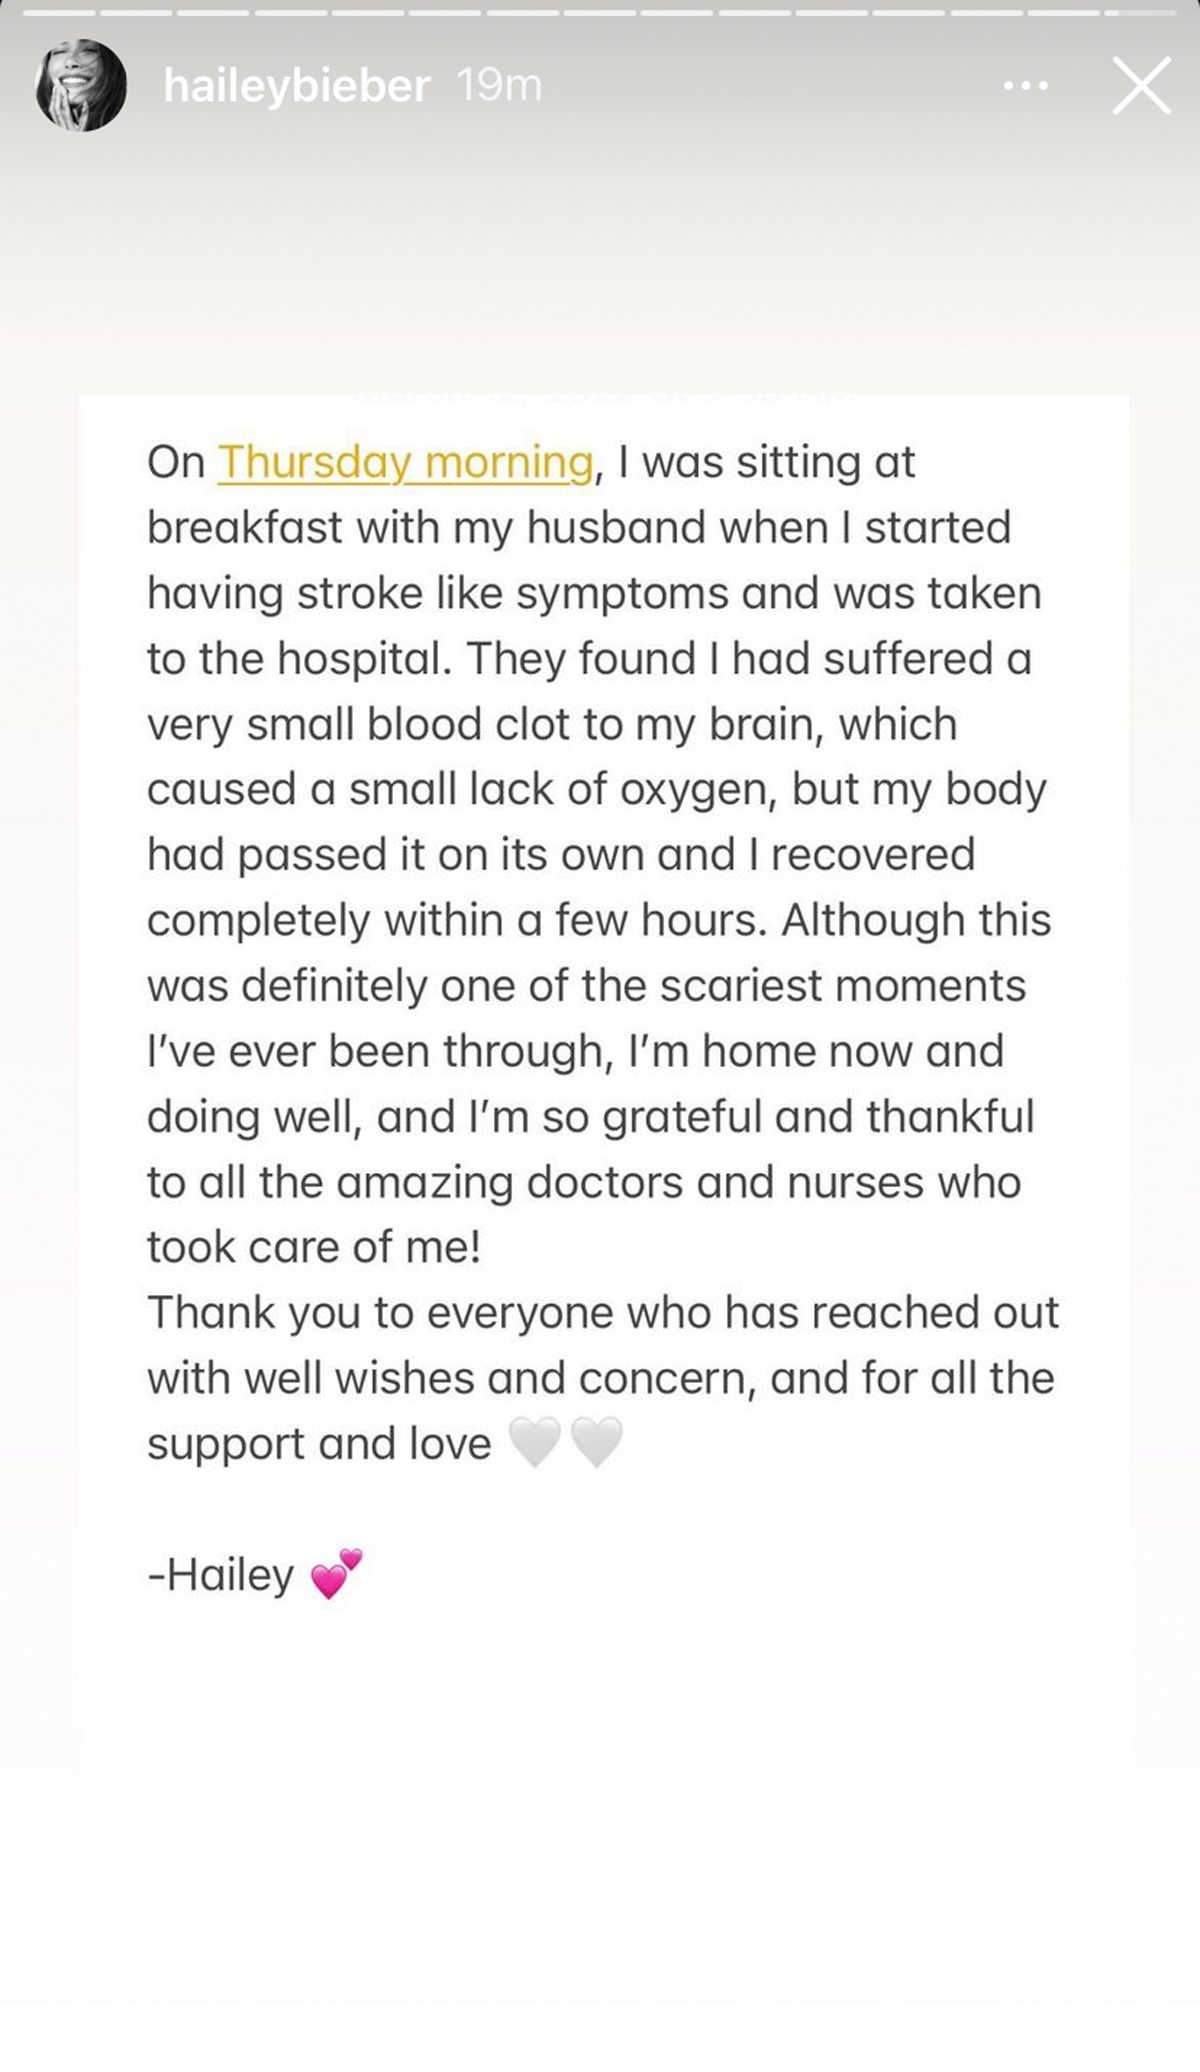 Hailey Bieber Hospitalized After Difficulties From ‘Stroke Like Symptoms’ Was responsible for By A Blood Clot In just Her Brain